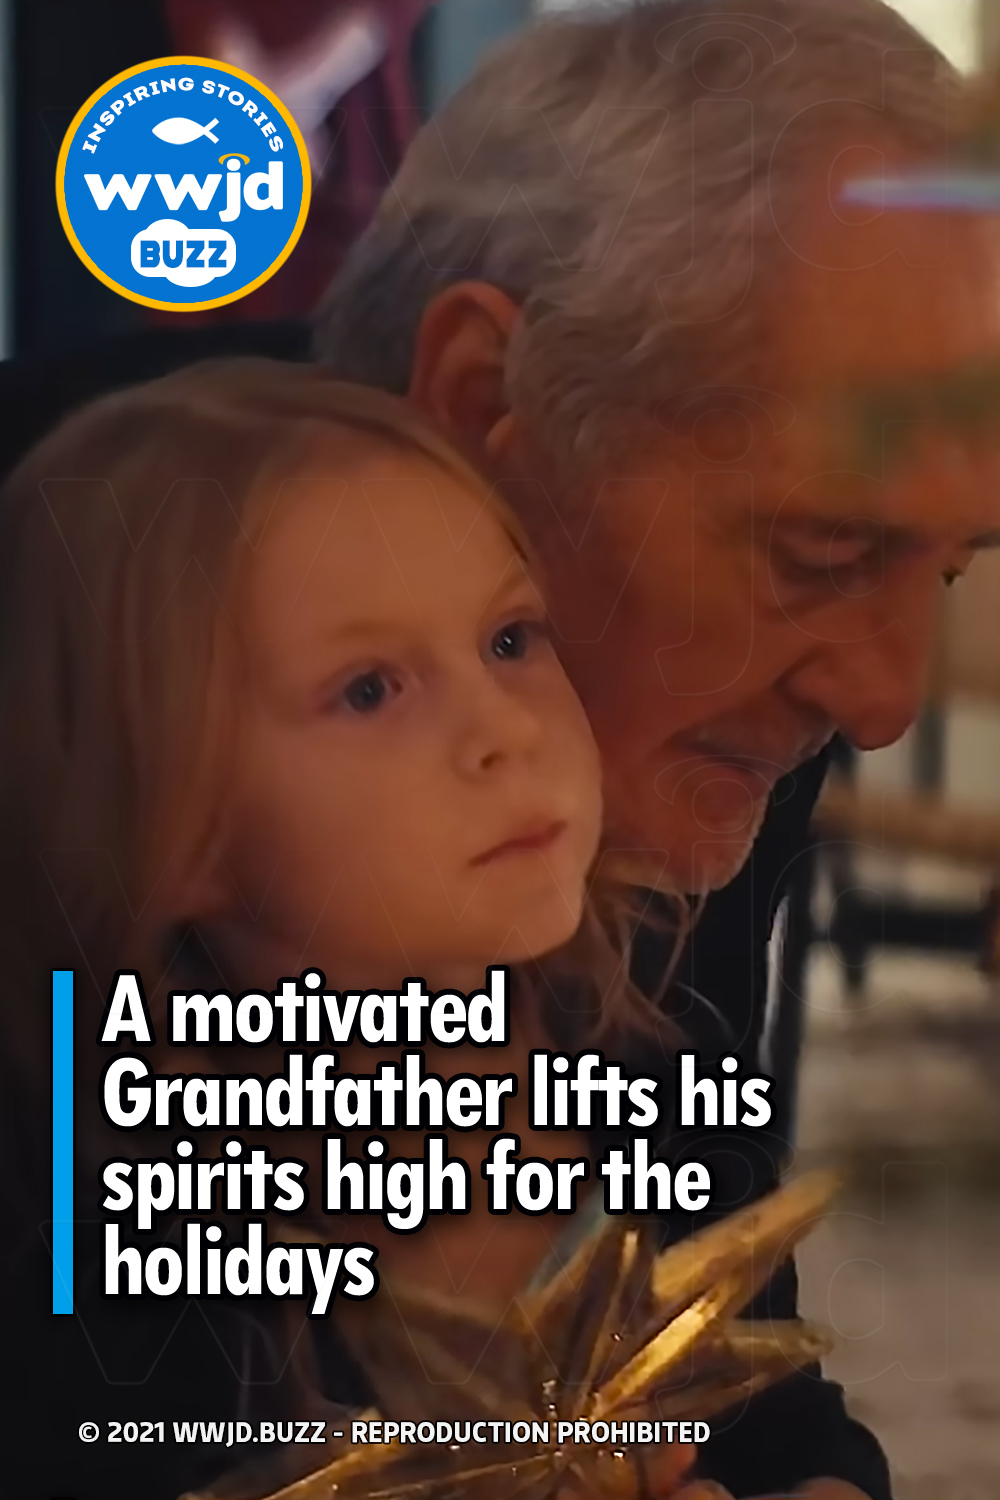 A motivated Grandfather lifts his spirits high for the holidays